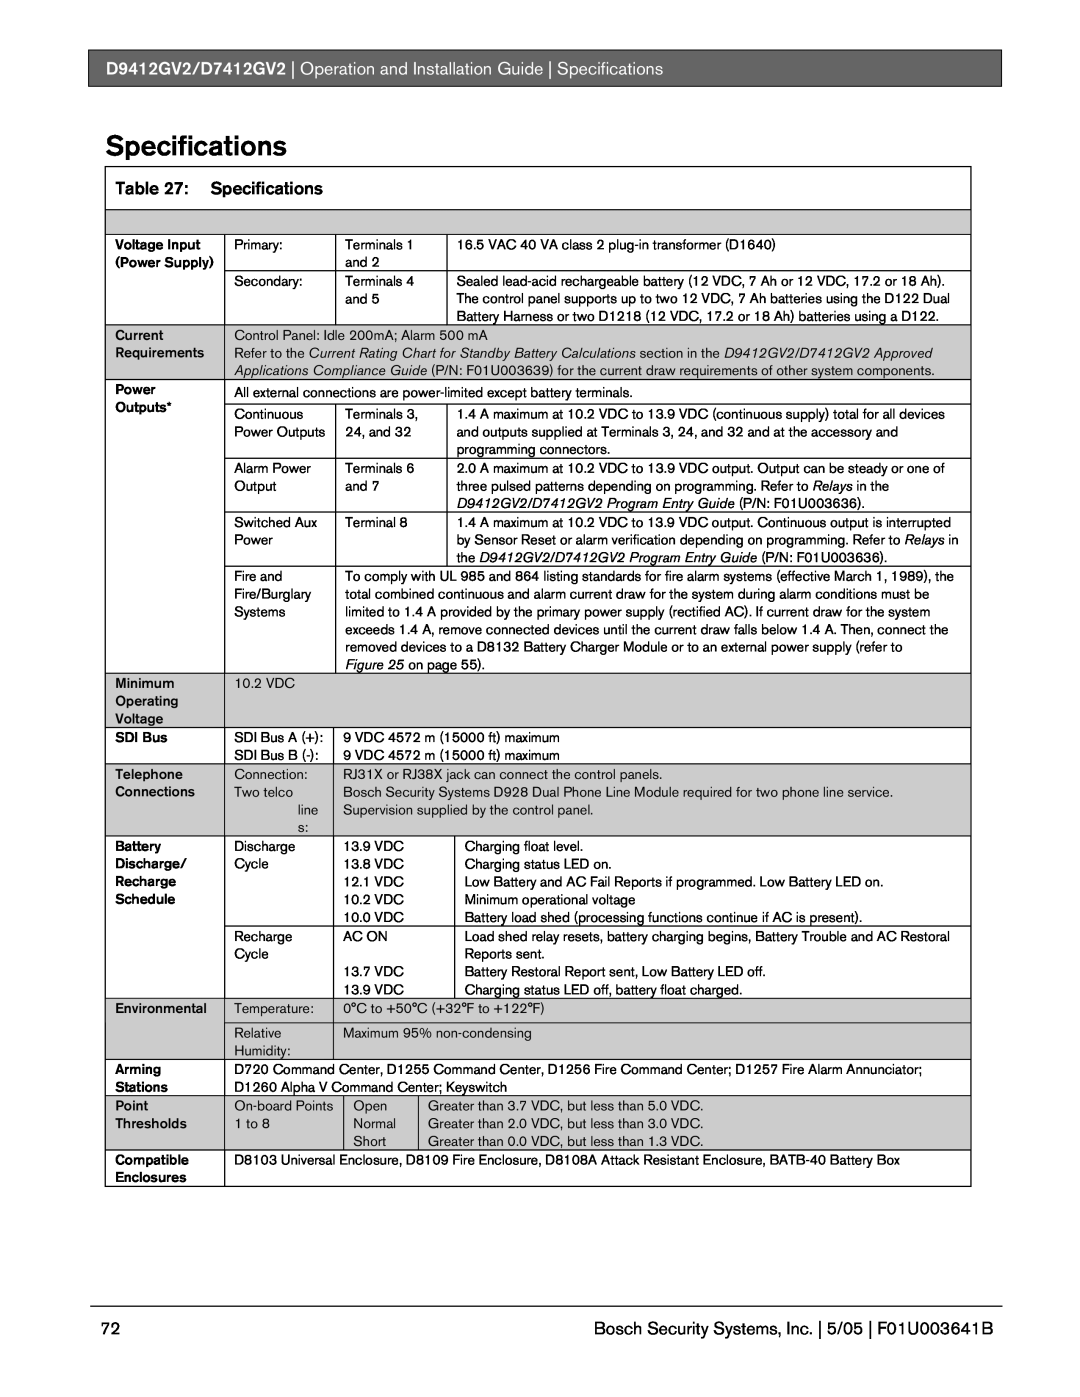 Bosch Appliances D9412GV2 manual Specifications, Table 